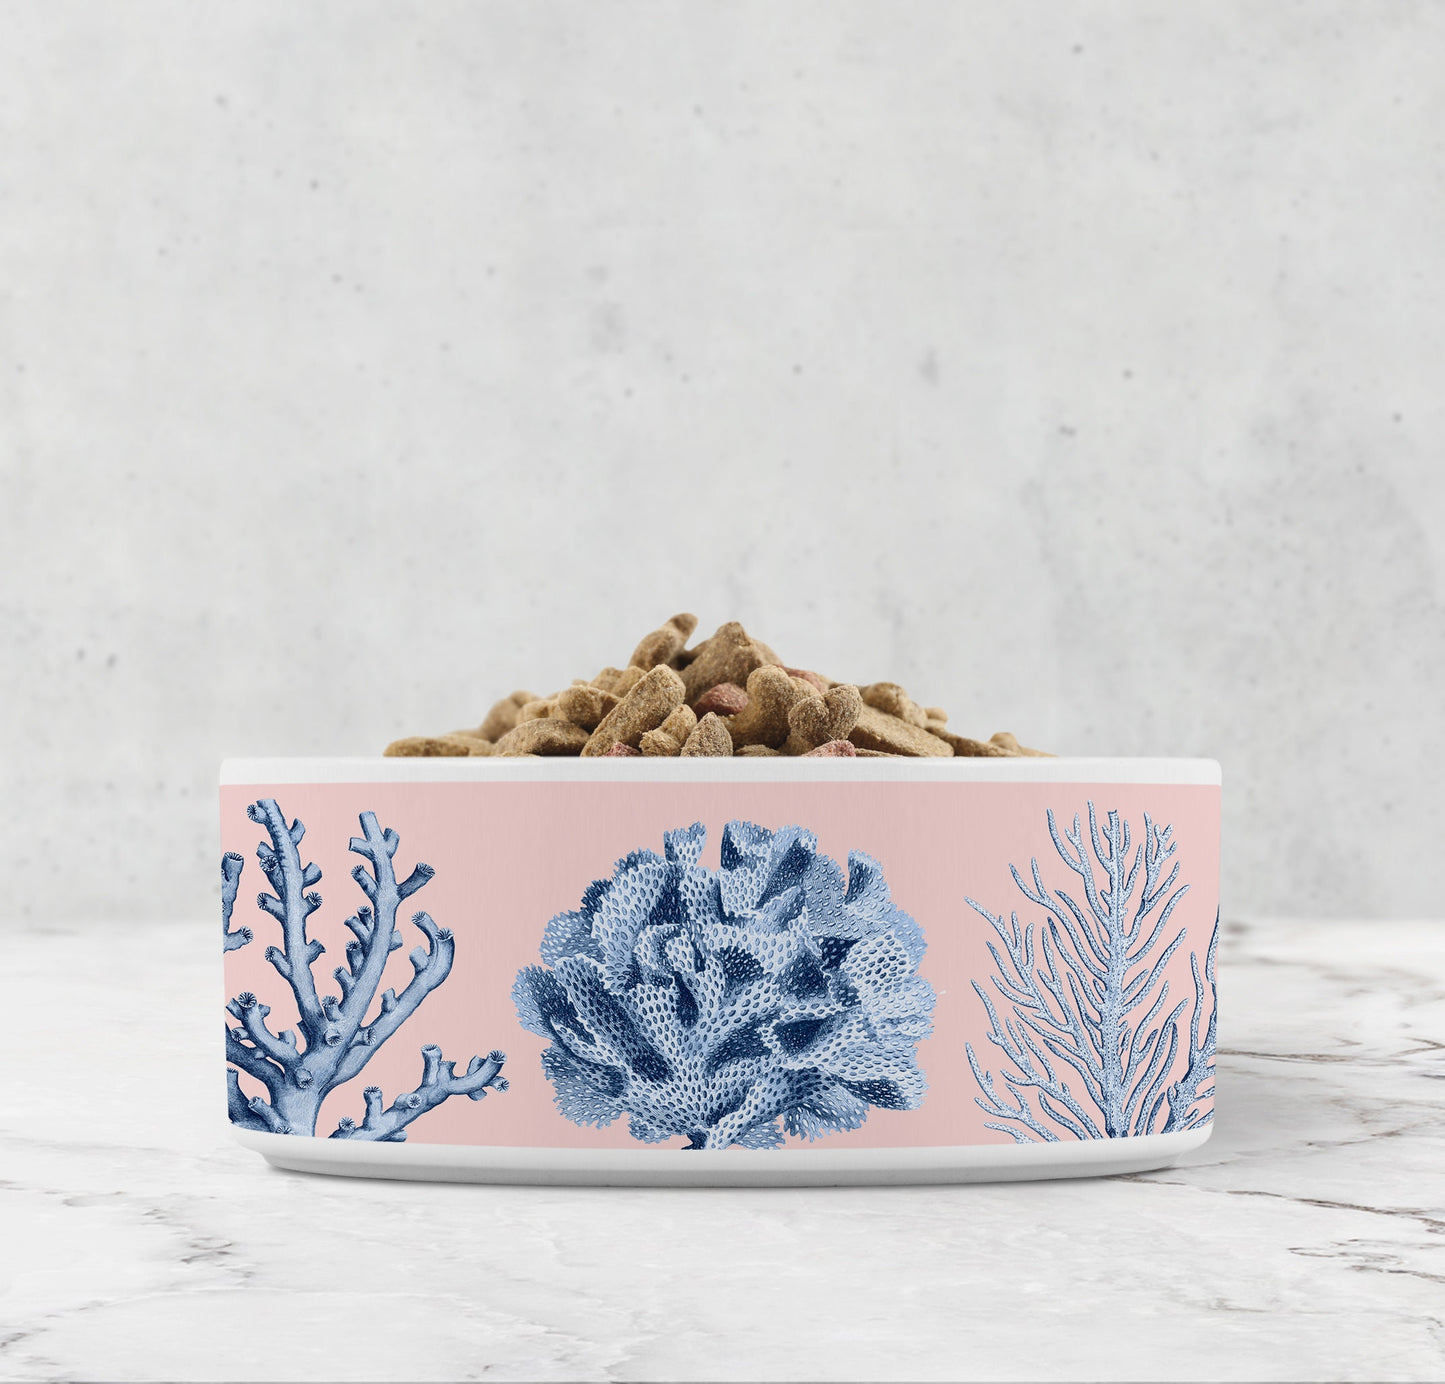 Ceramic dog bowl with gorgeous blue coral reef printed on pale pink background